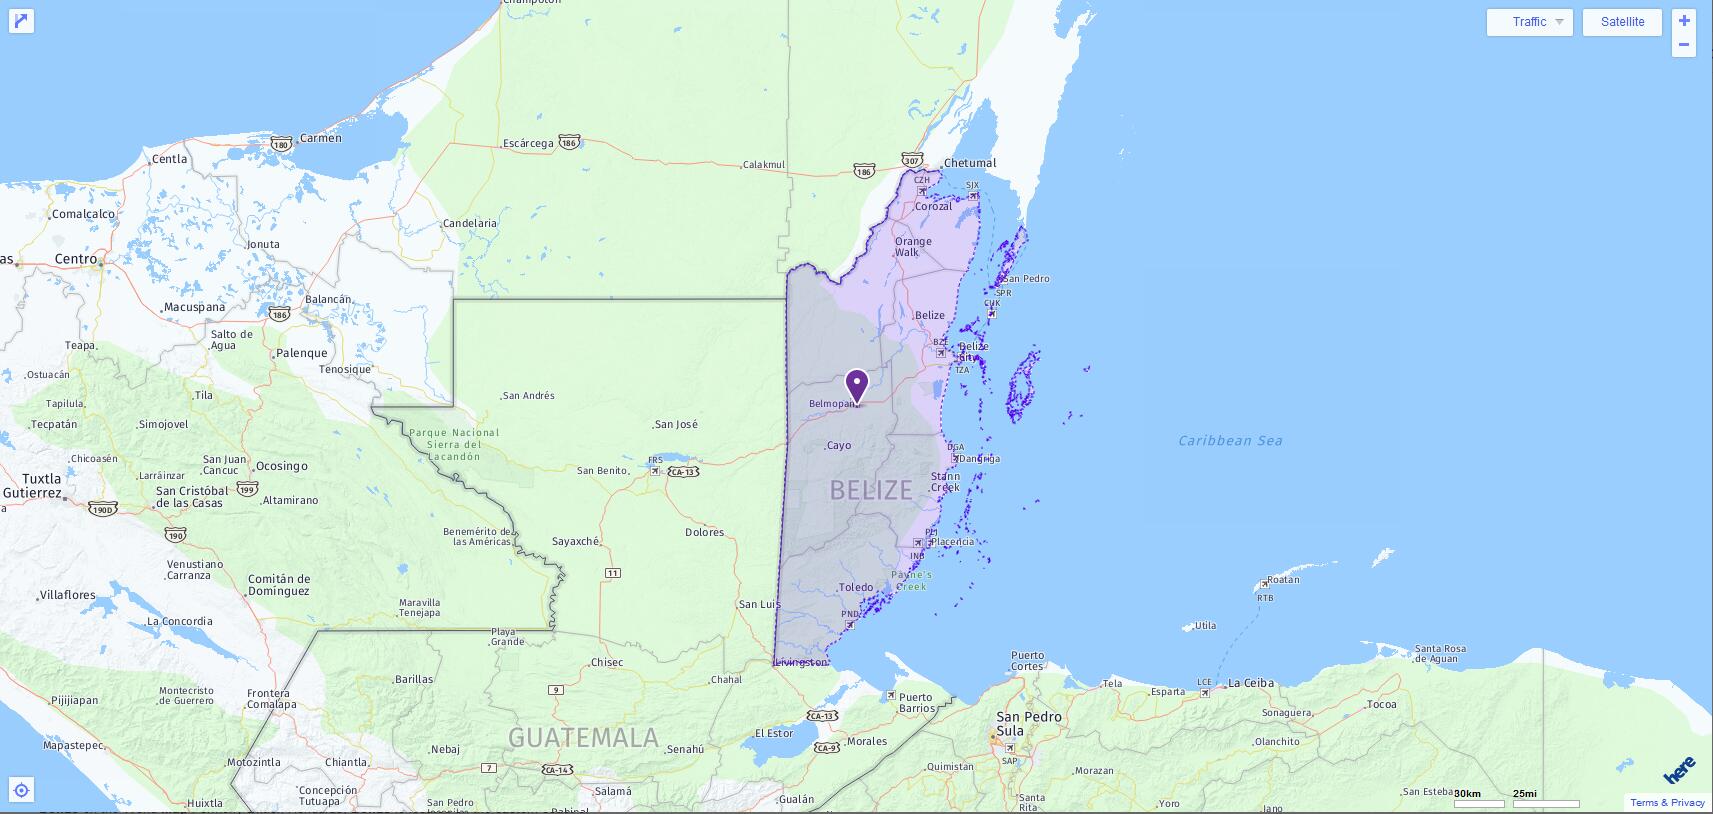 ACT Test Centers and Dates in Belize